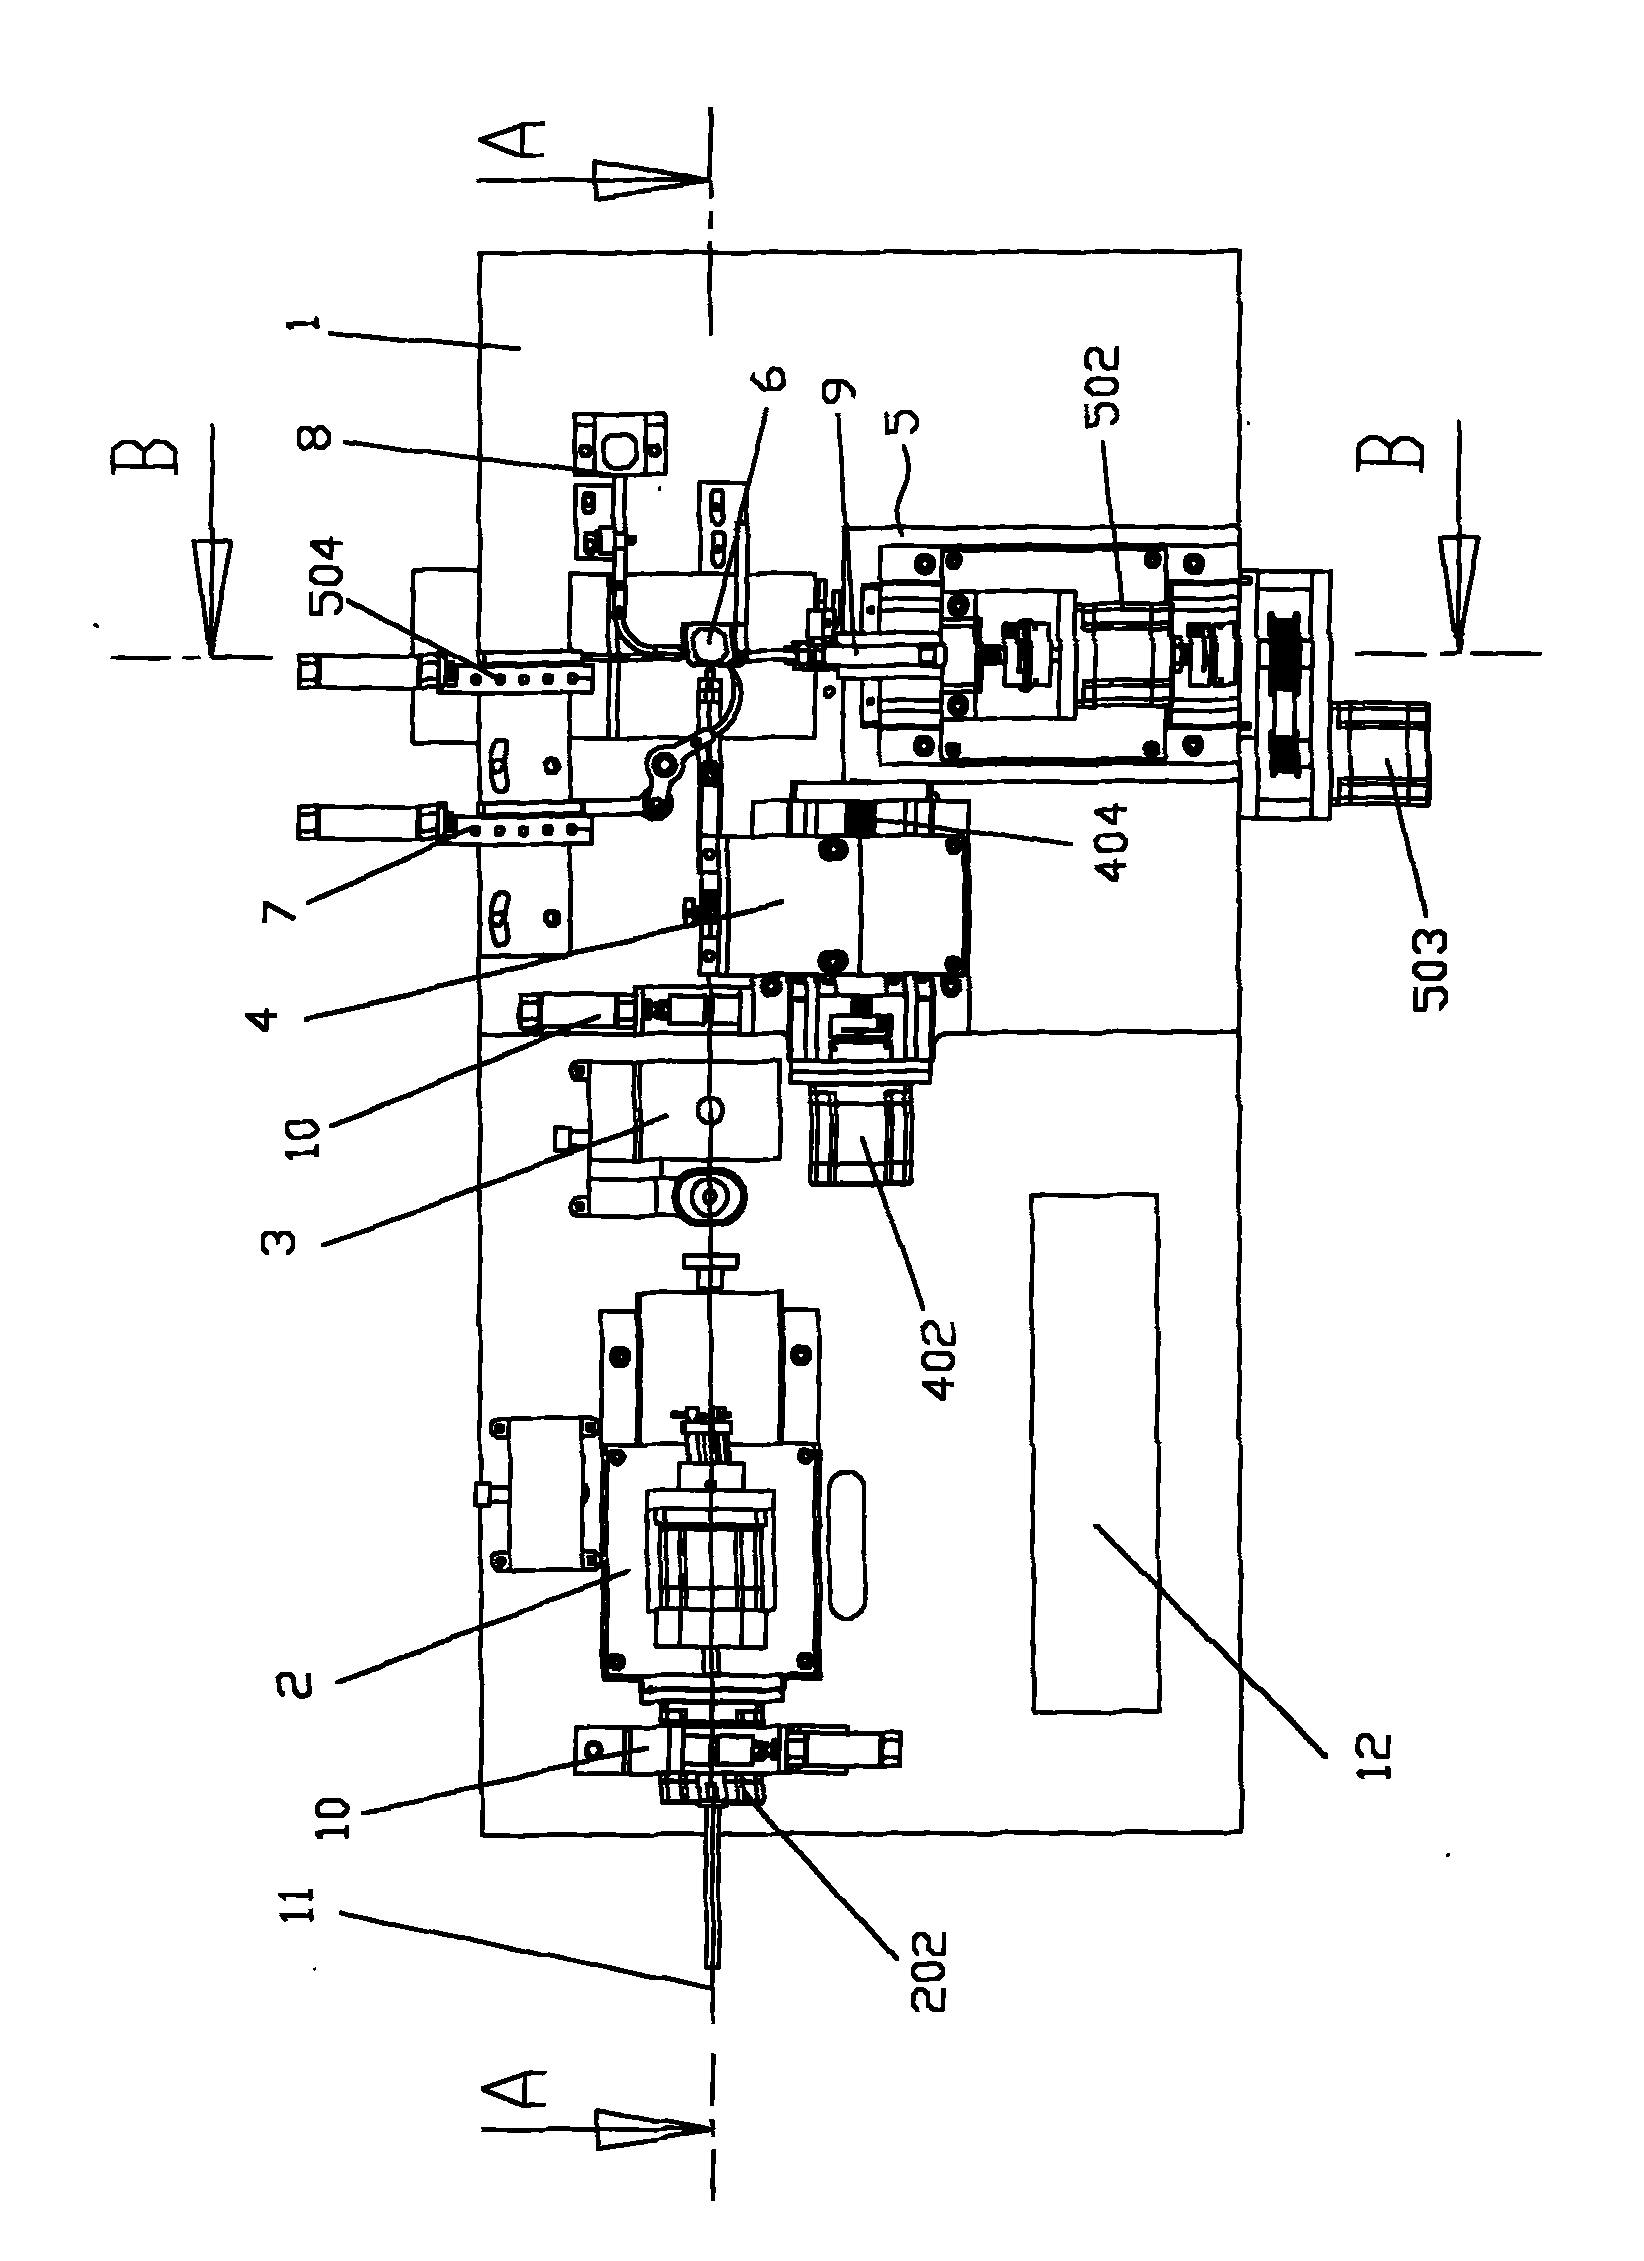 Full-automatic coiling machine